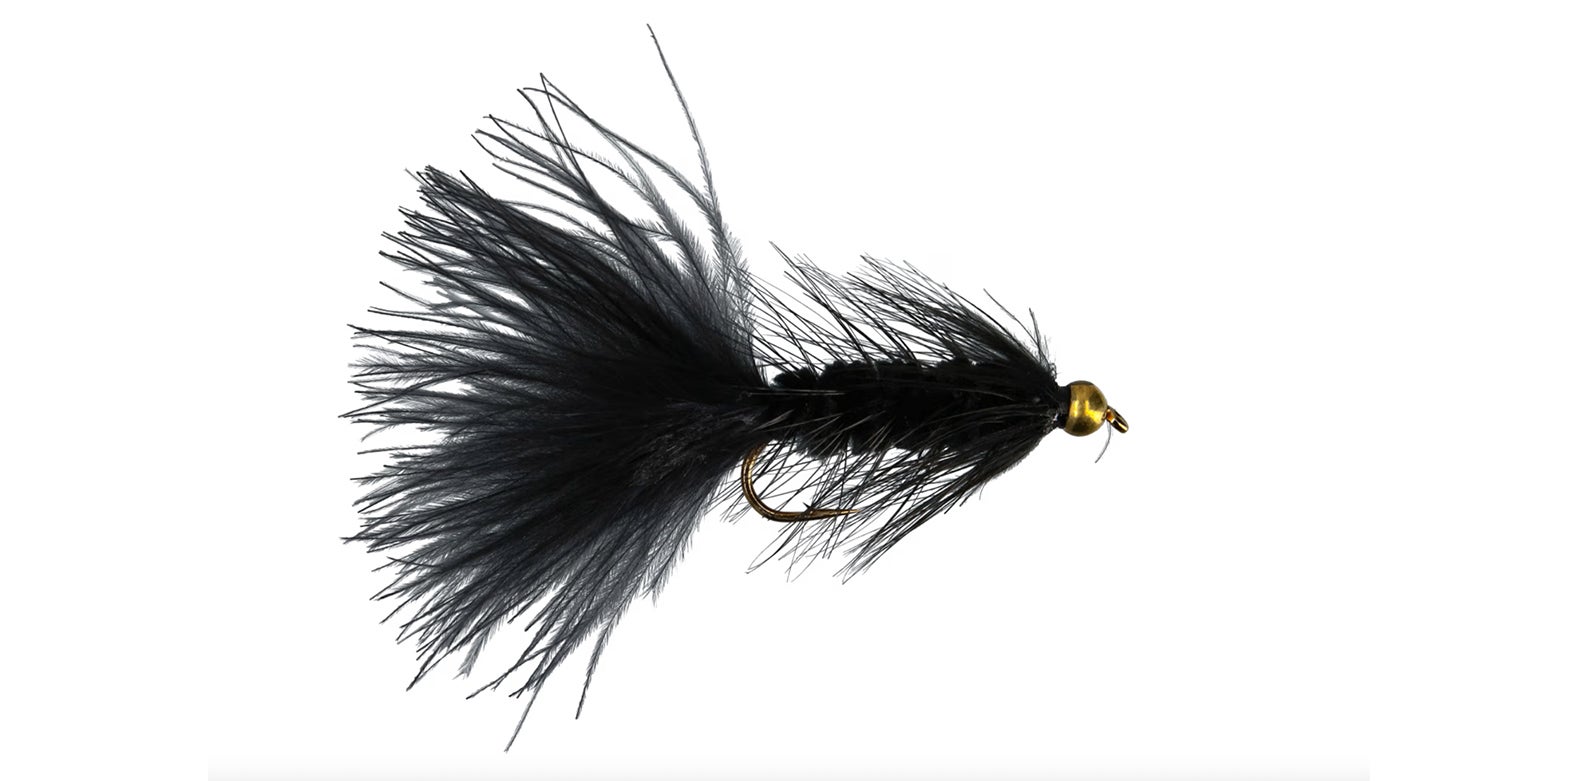 Old Favorite Lake Fly Collection Available - Classic Fly Tying